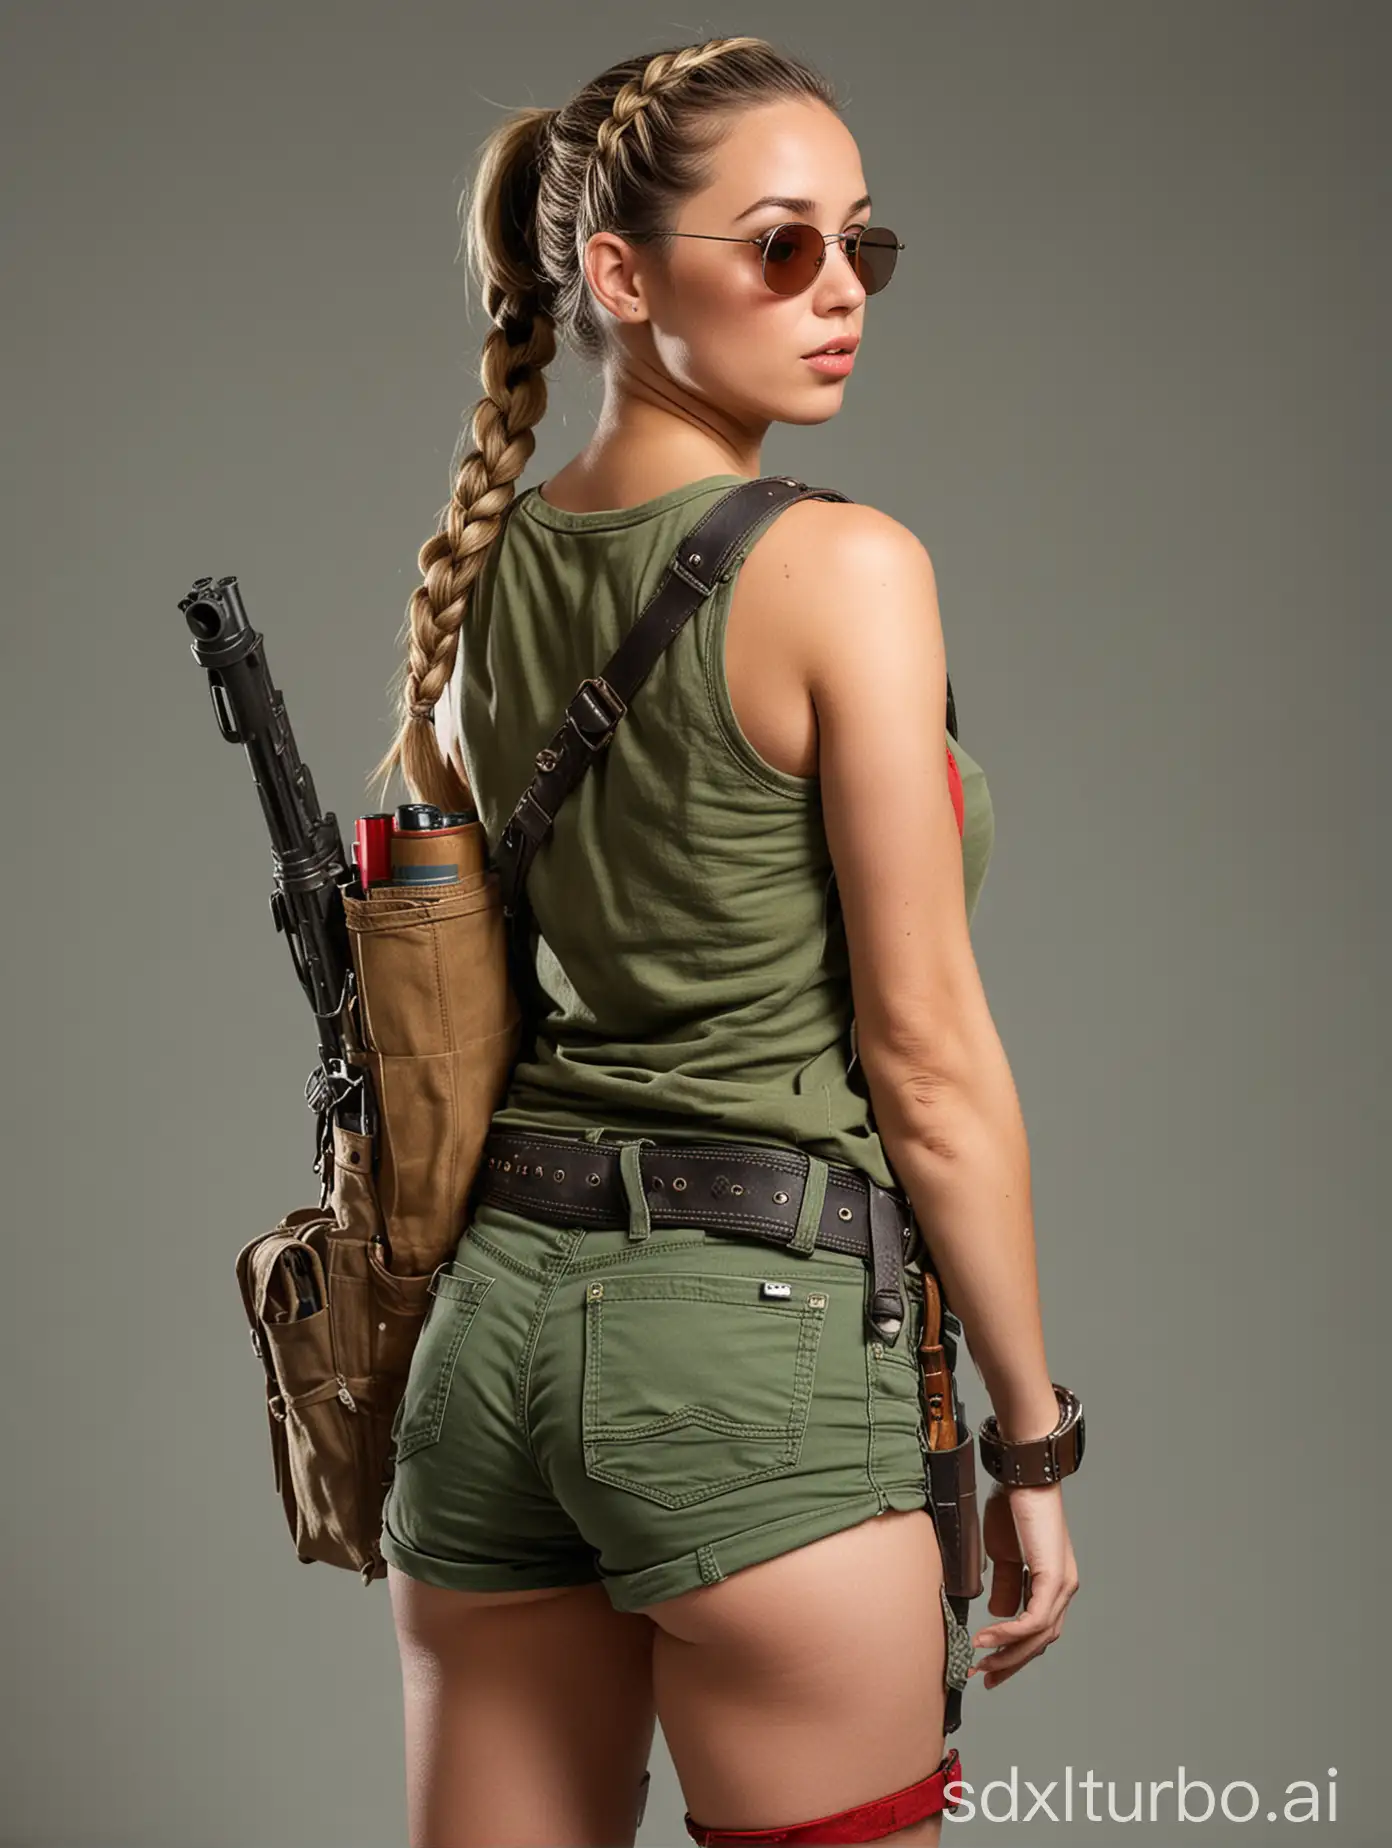 A woman with a braided ponytail, wearing sunglasses and a green tank top, stands with her back to the viewer. She wears tan shorts, and brown boots, and has a backpack. She also wears a black arm brace on her right arm and has an ammunition belt on her left arm. She is carrying a gun in her right hand and wears a red nose ring.